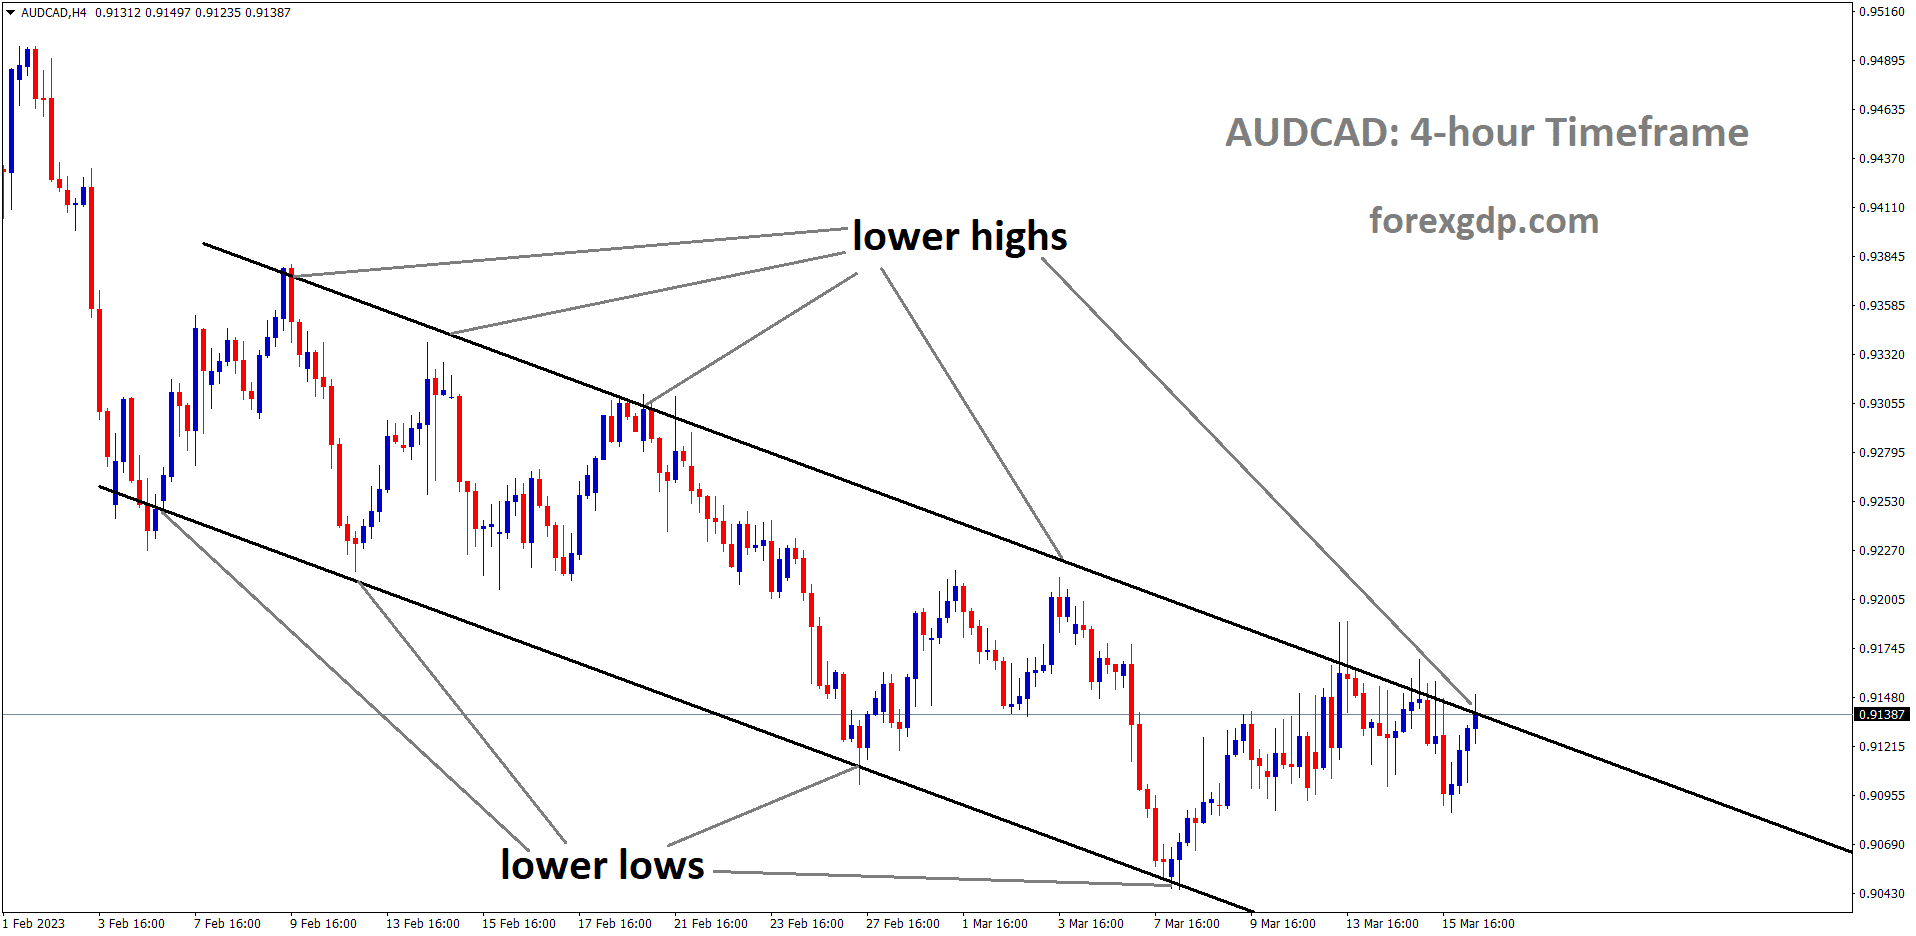 AUDCAD is moving in Descending channel and the market has reached the lower high area of the channel. 1